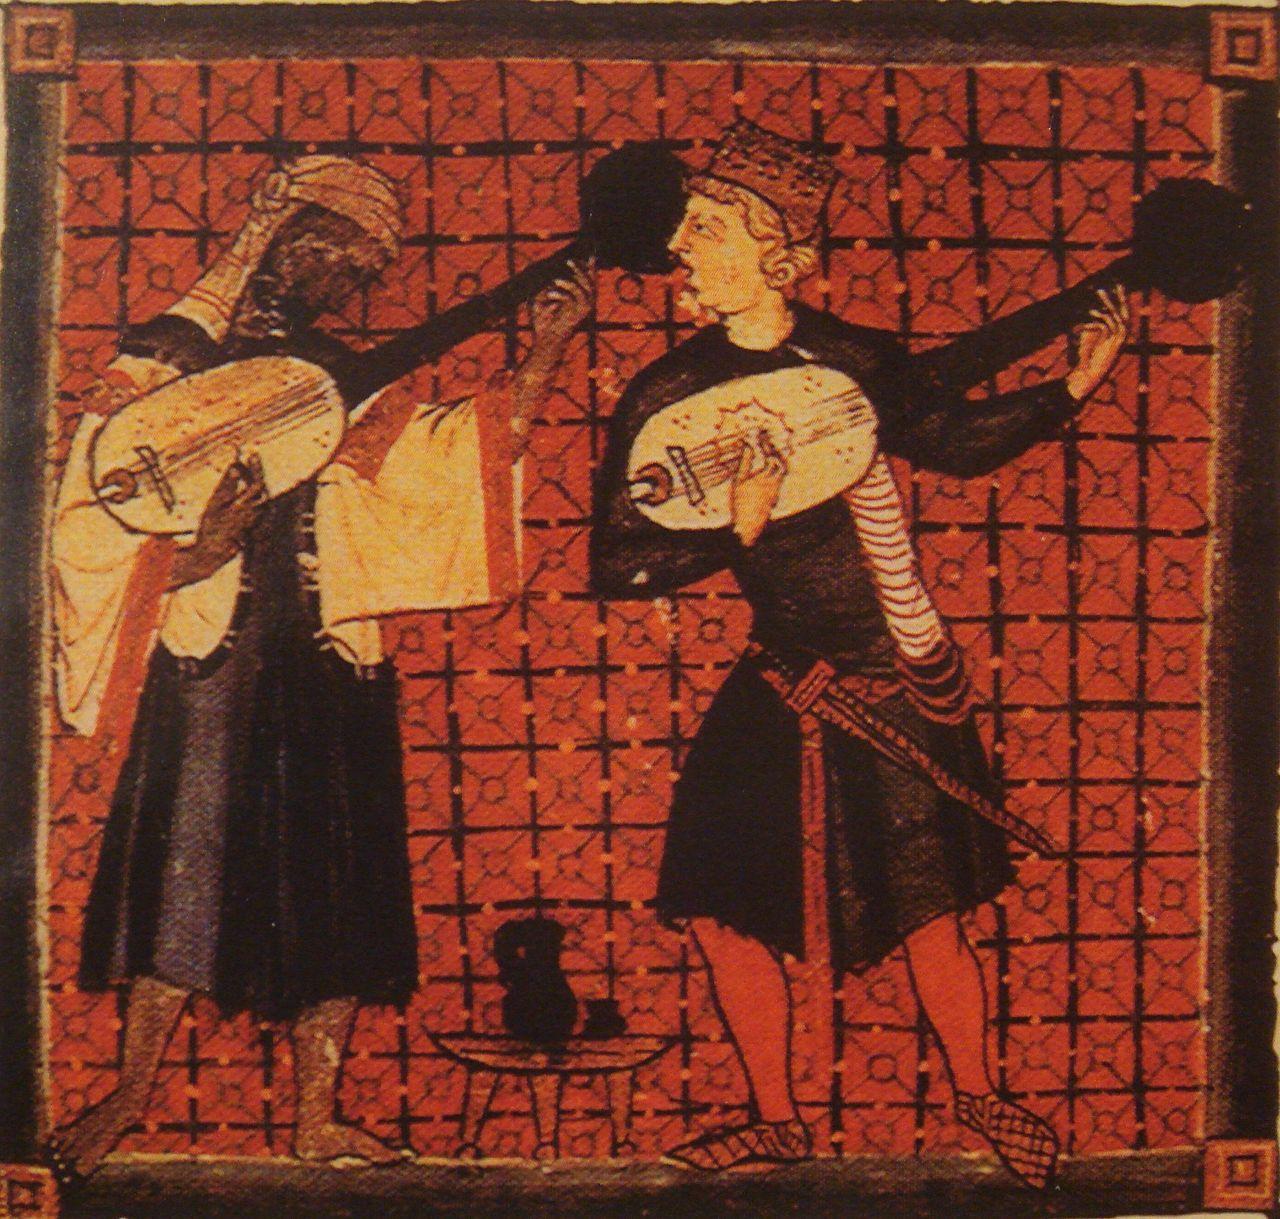 Christian and Muslim playing ouds - Miniature of Catinas de Santa Maria. by King Alfonso X